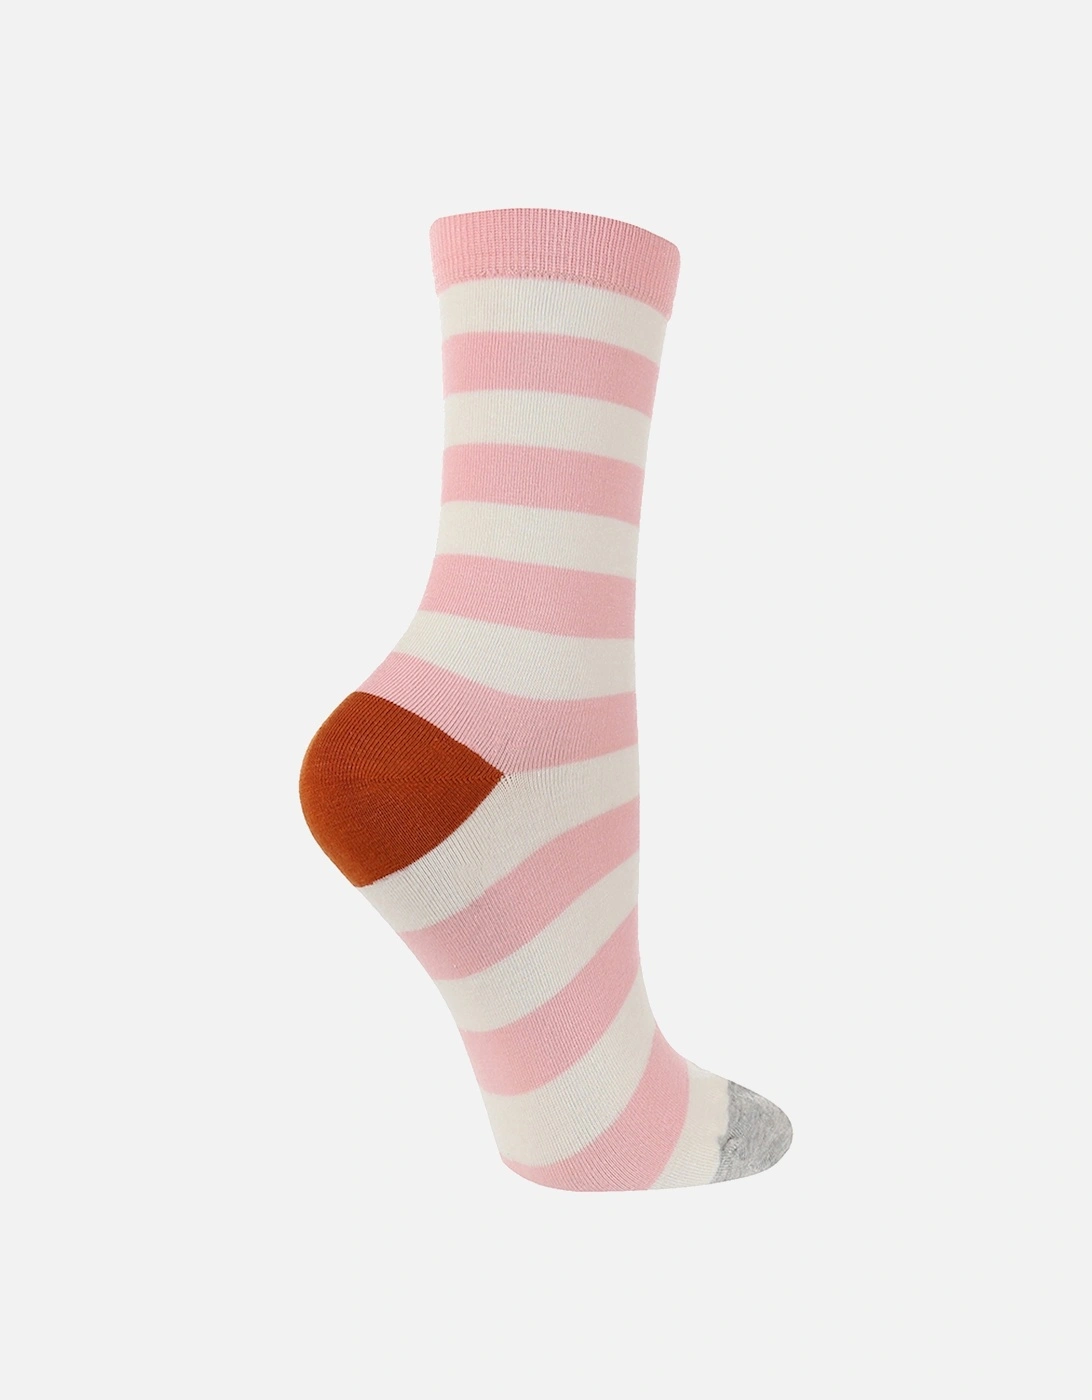 1 PAIR HIGH-END SOCK WITH PINK AND CREAM STRIPES, 2 of 1